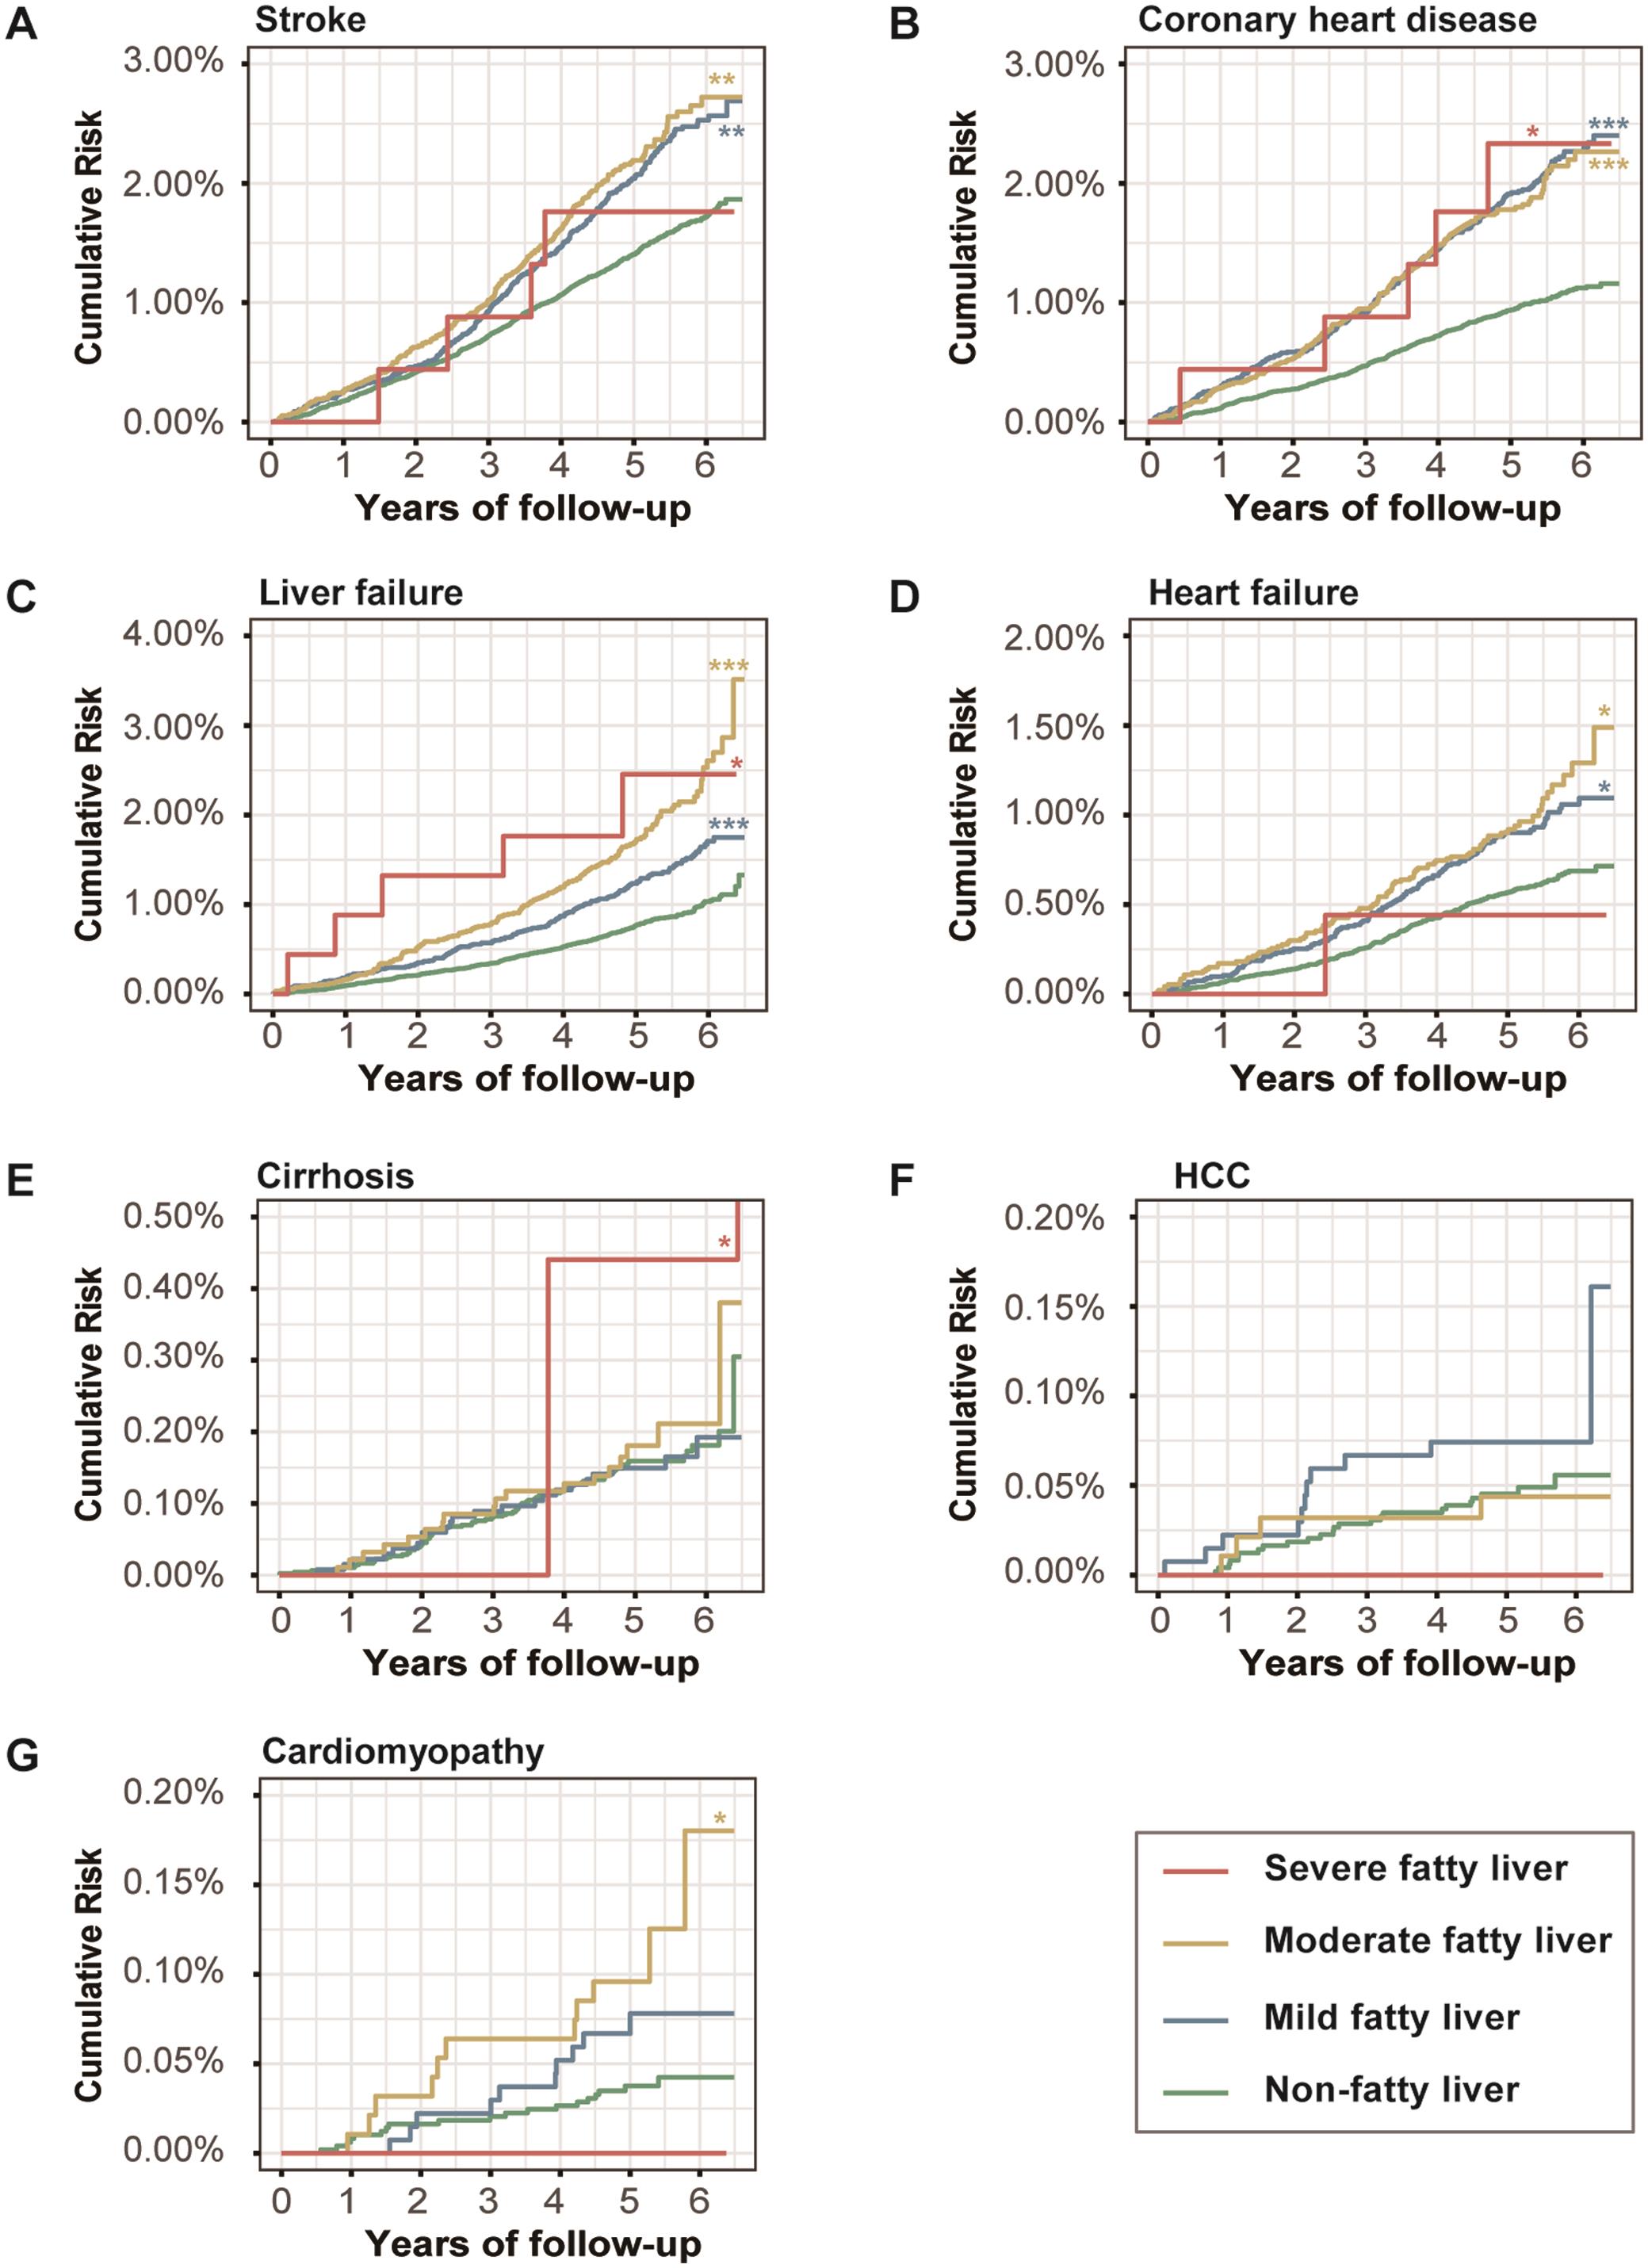 Cumulative risk of developing incident (A) Stroke, (B) Coronary heart disease, (C) Liver failure, (D) Heart failure, (E) Cirrhosis, (F) Hepatocellular carcinoma, (G) Cardiomyopathy in four groups by steatosis severity.